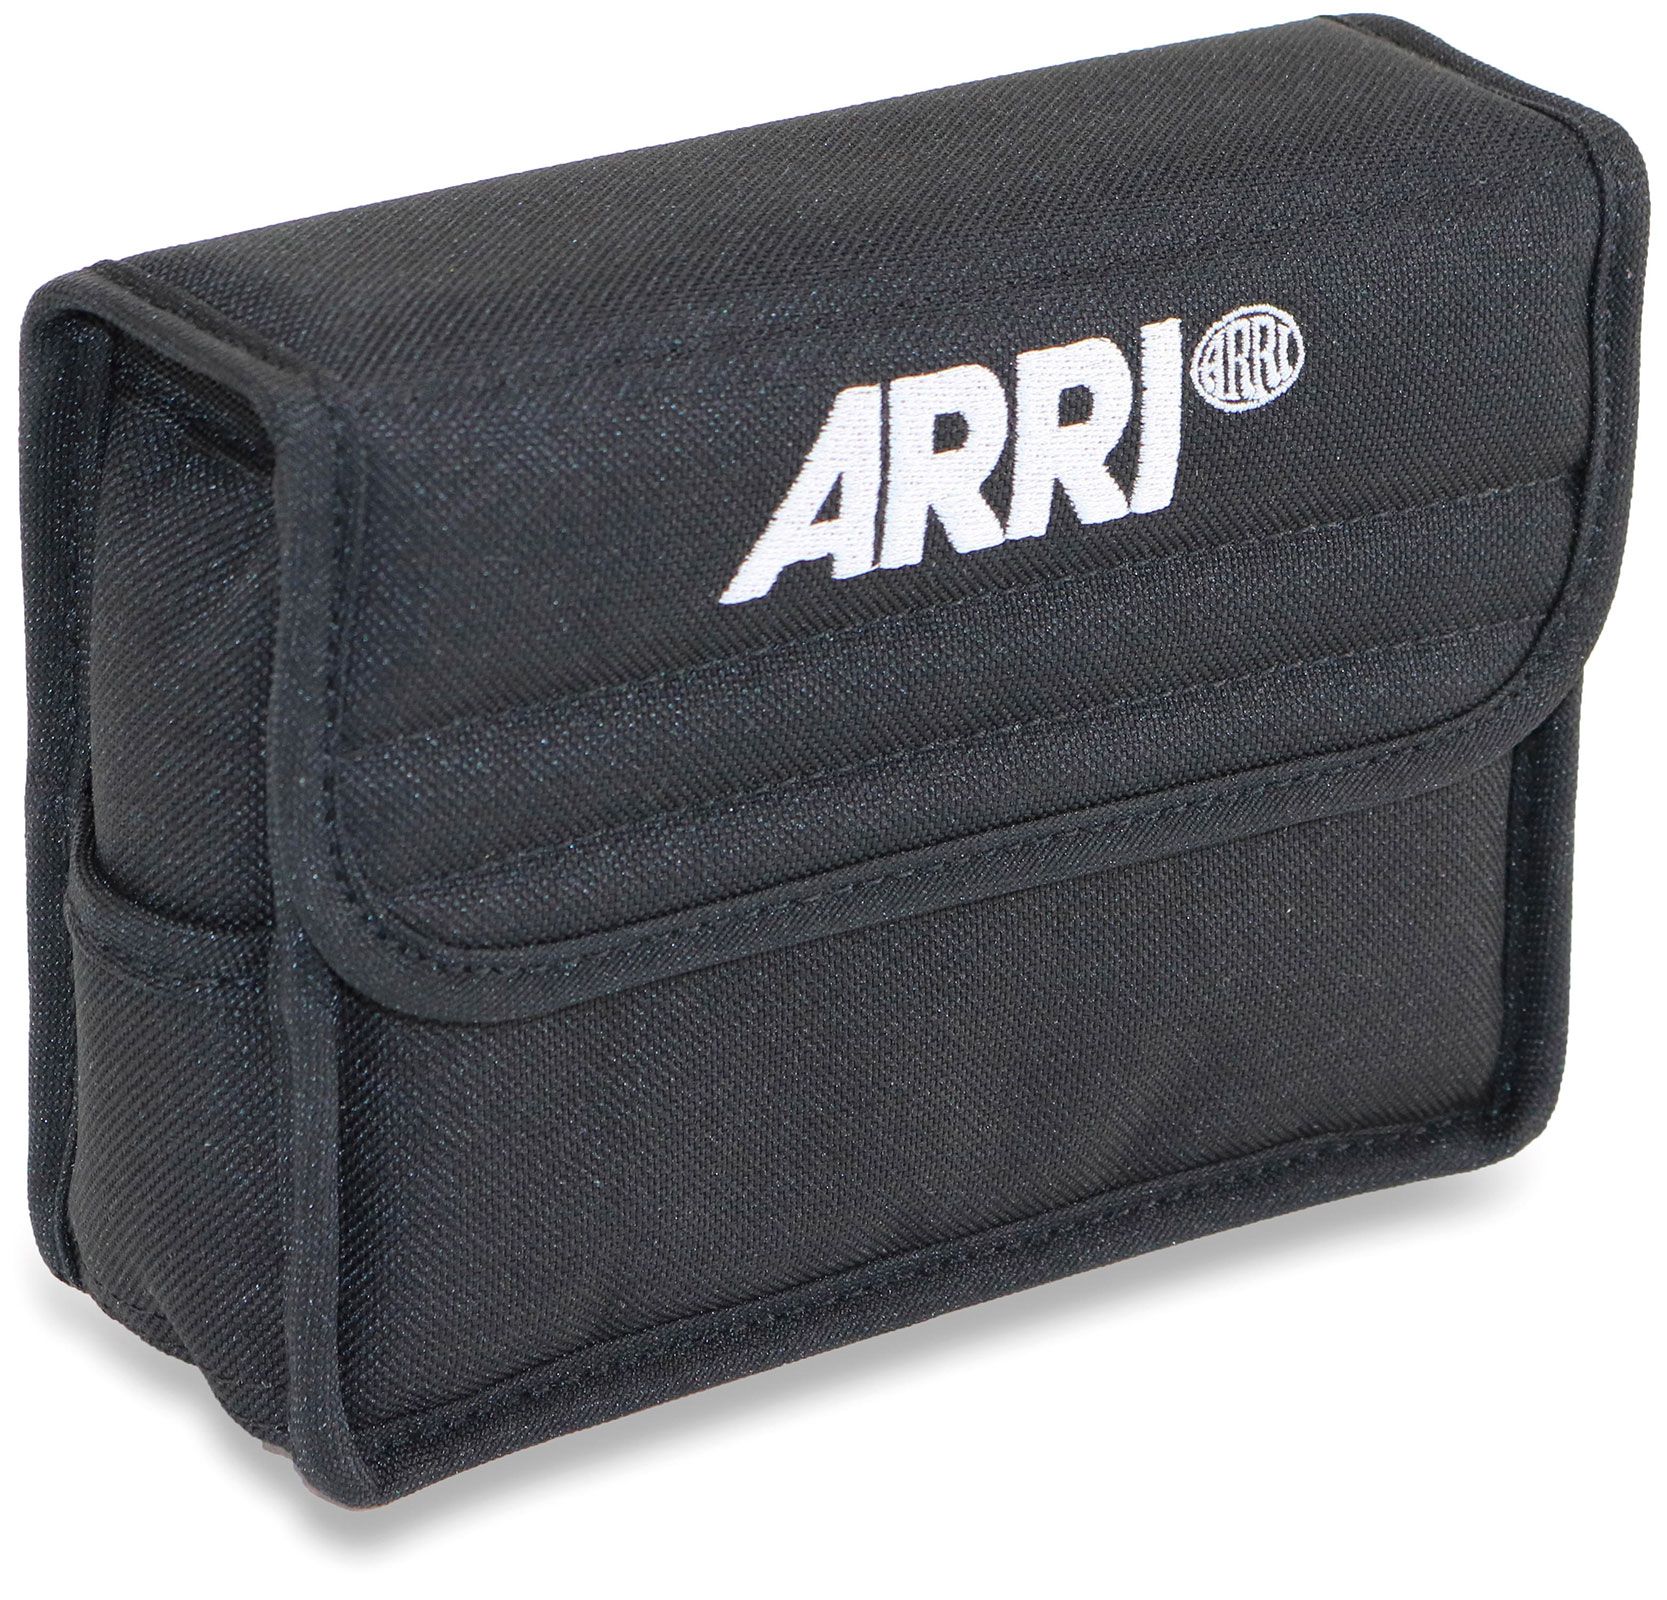 ARRI - Orbiter Panel Control Carrying Pouch